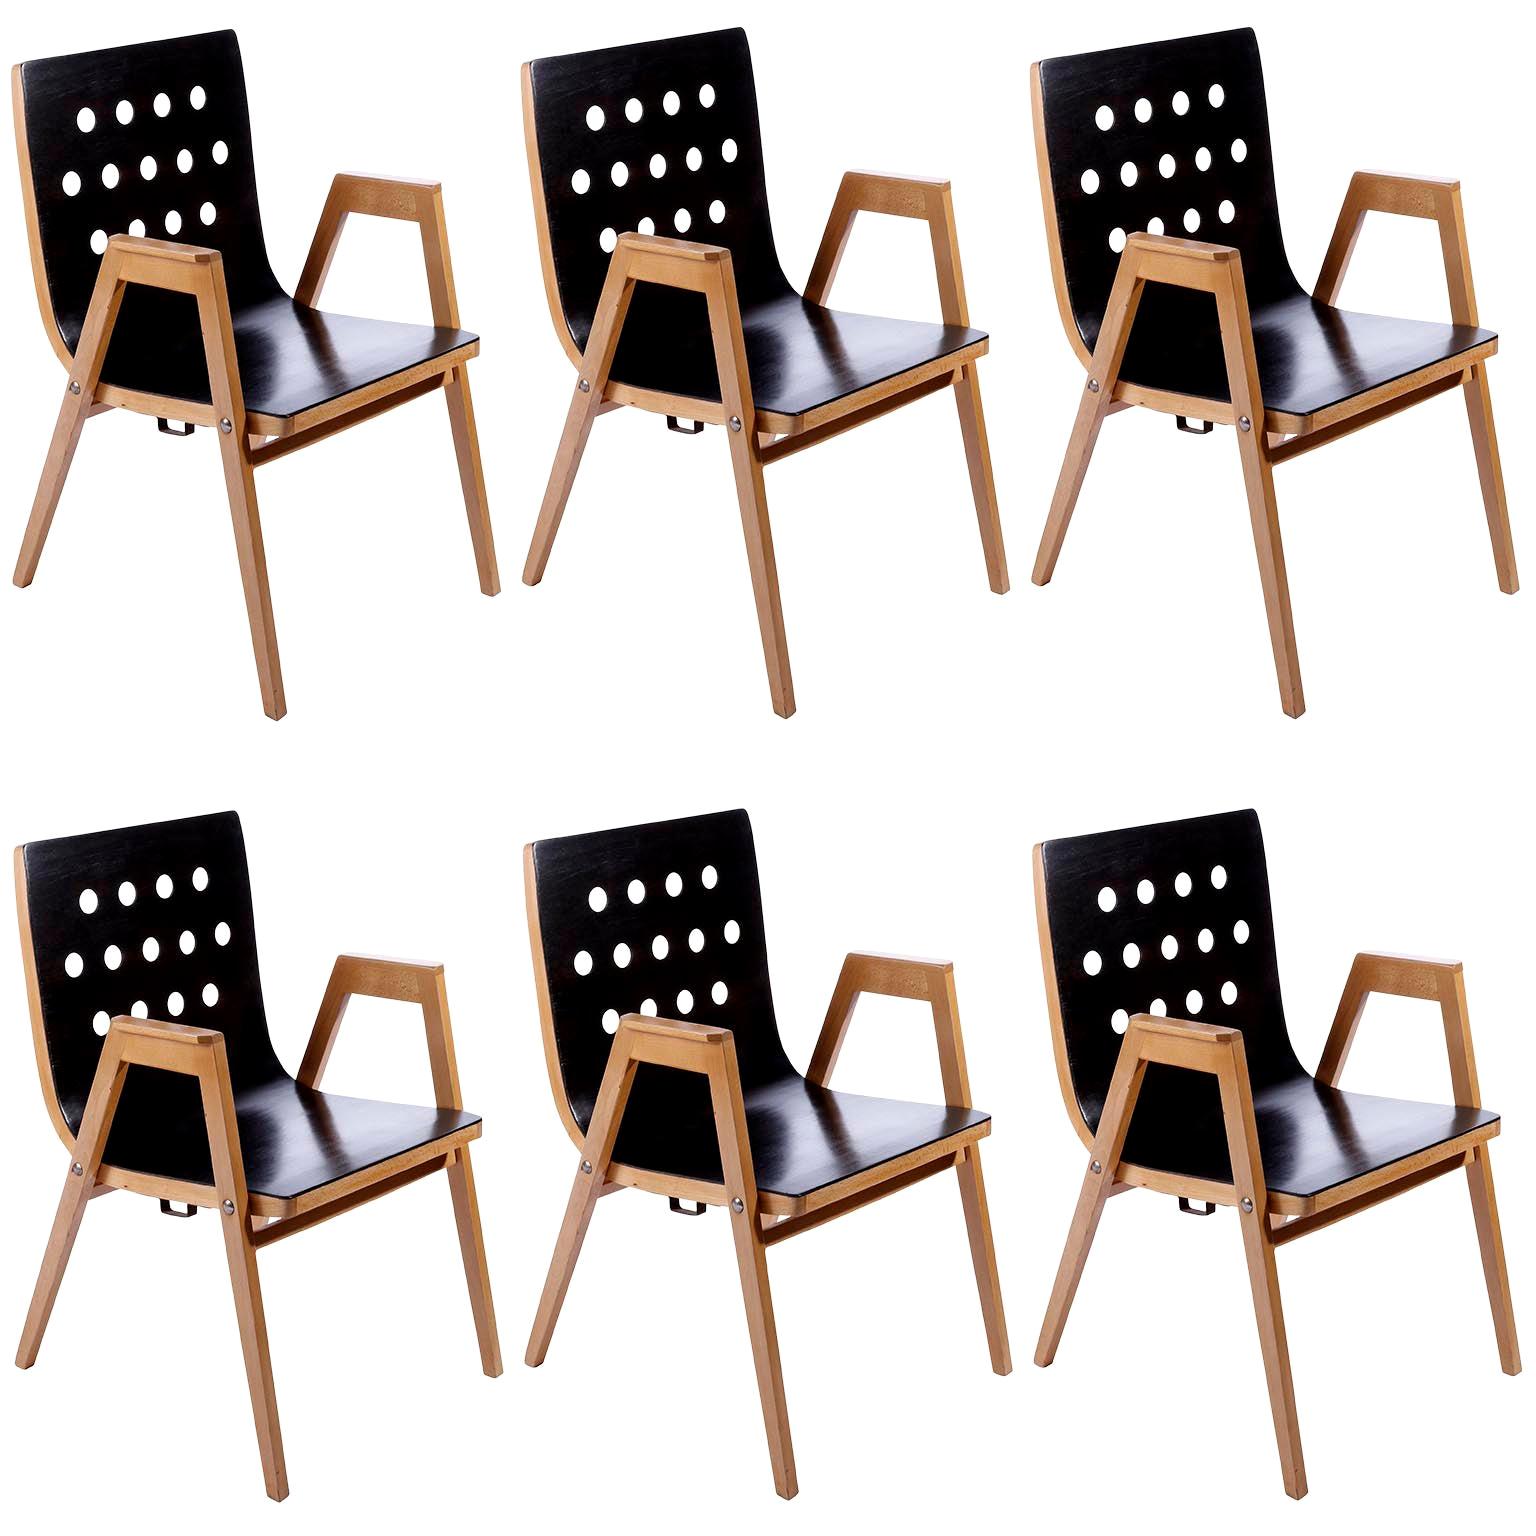 Roland Rainer, Set of 6 Armchairs Stacking Chairs, 1951